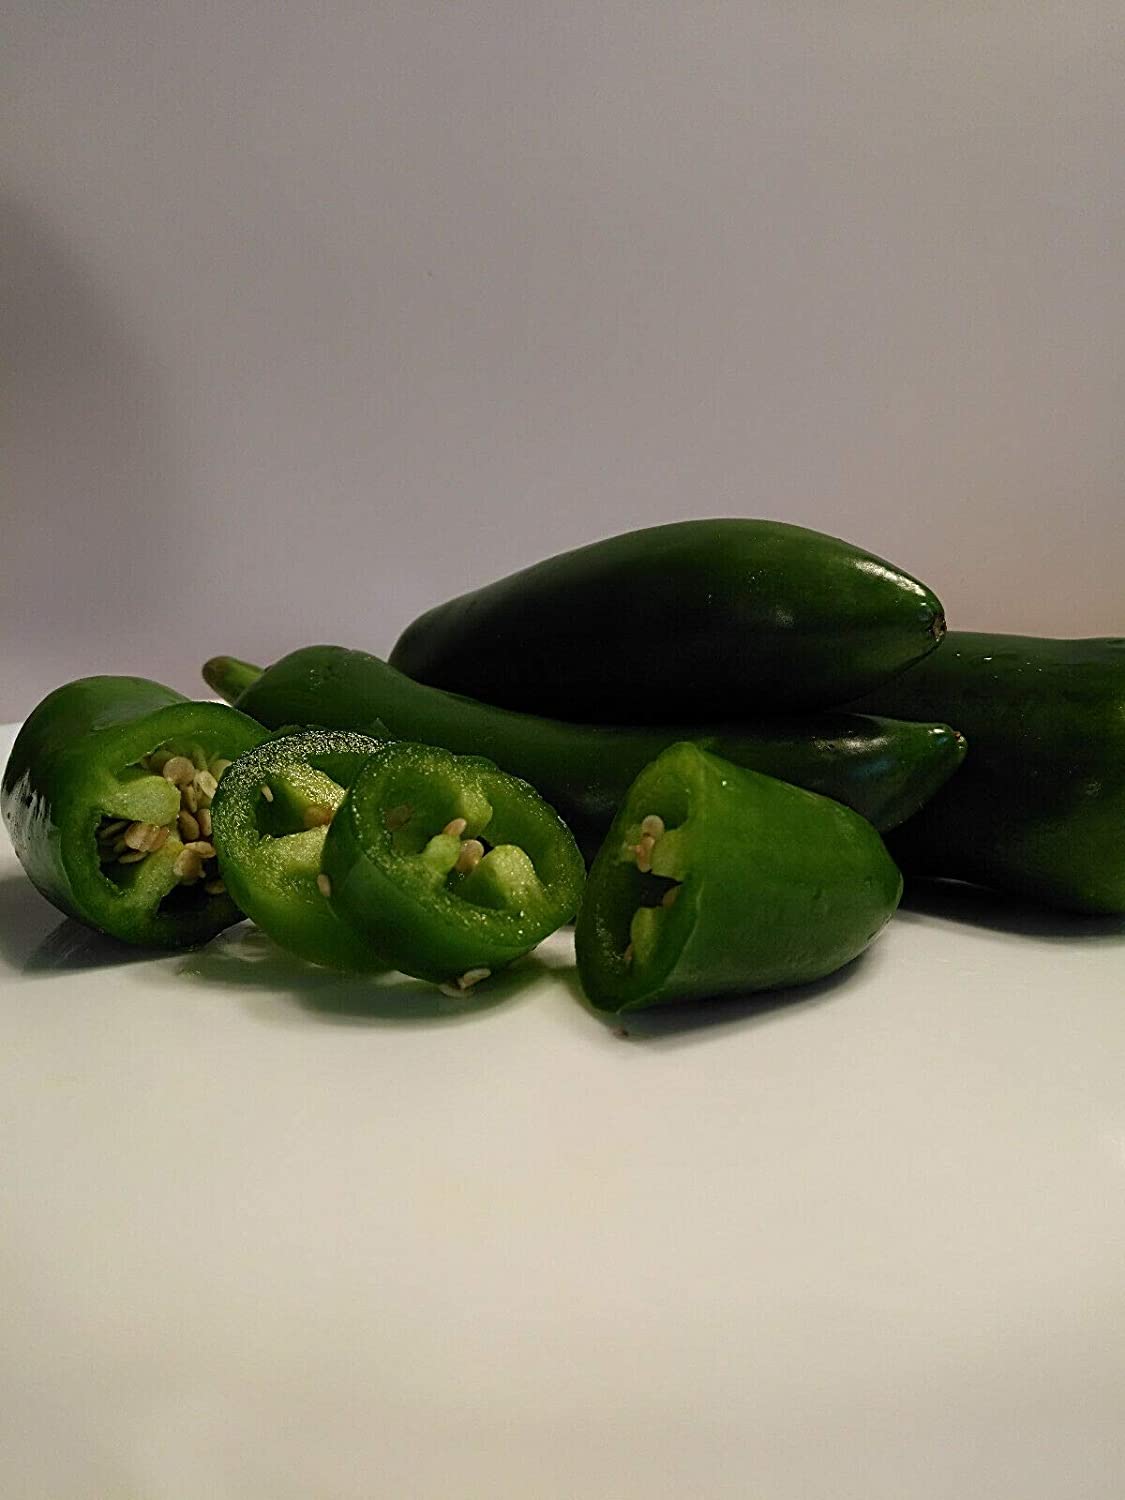 Early Jalapeno Hot Pepper 50 Vegetable Seeds - Capsicum annuum, Mexican Chili Pepper for Salsa